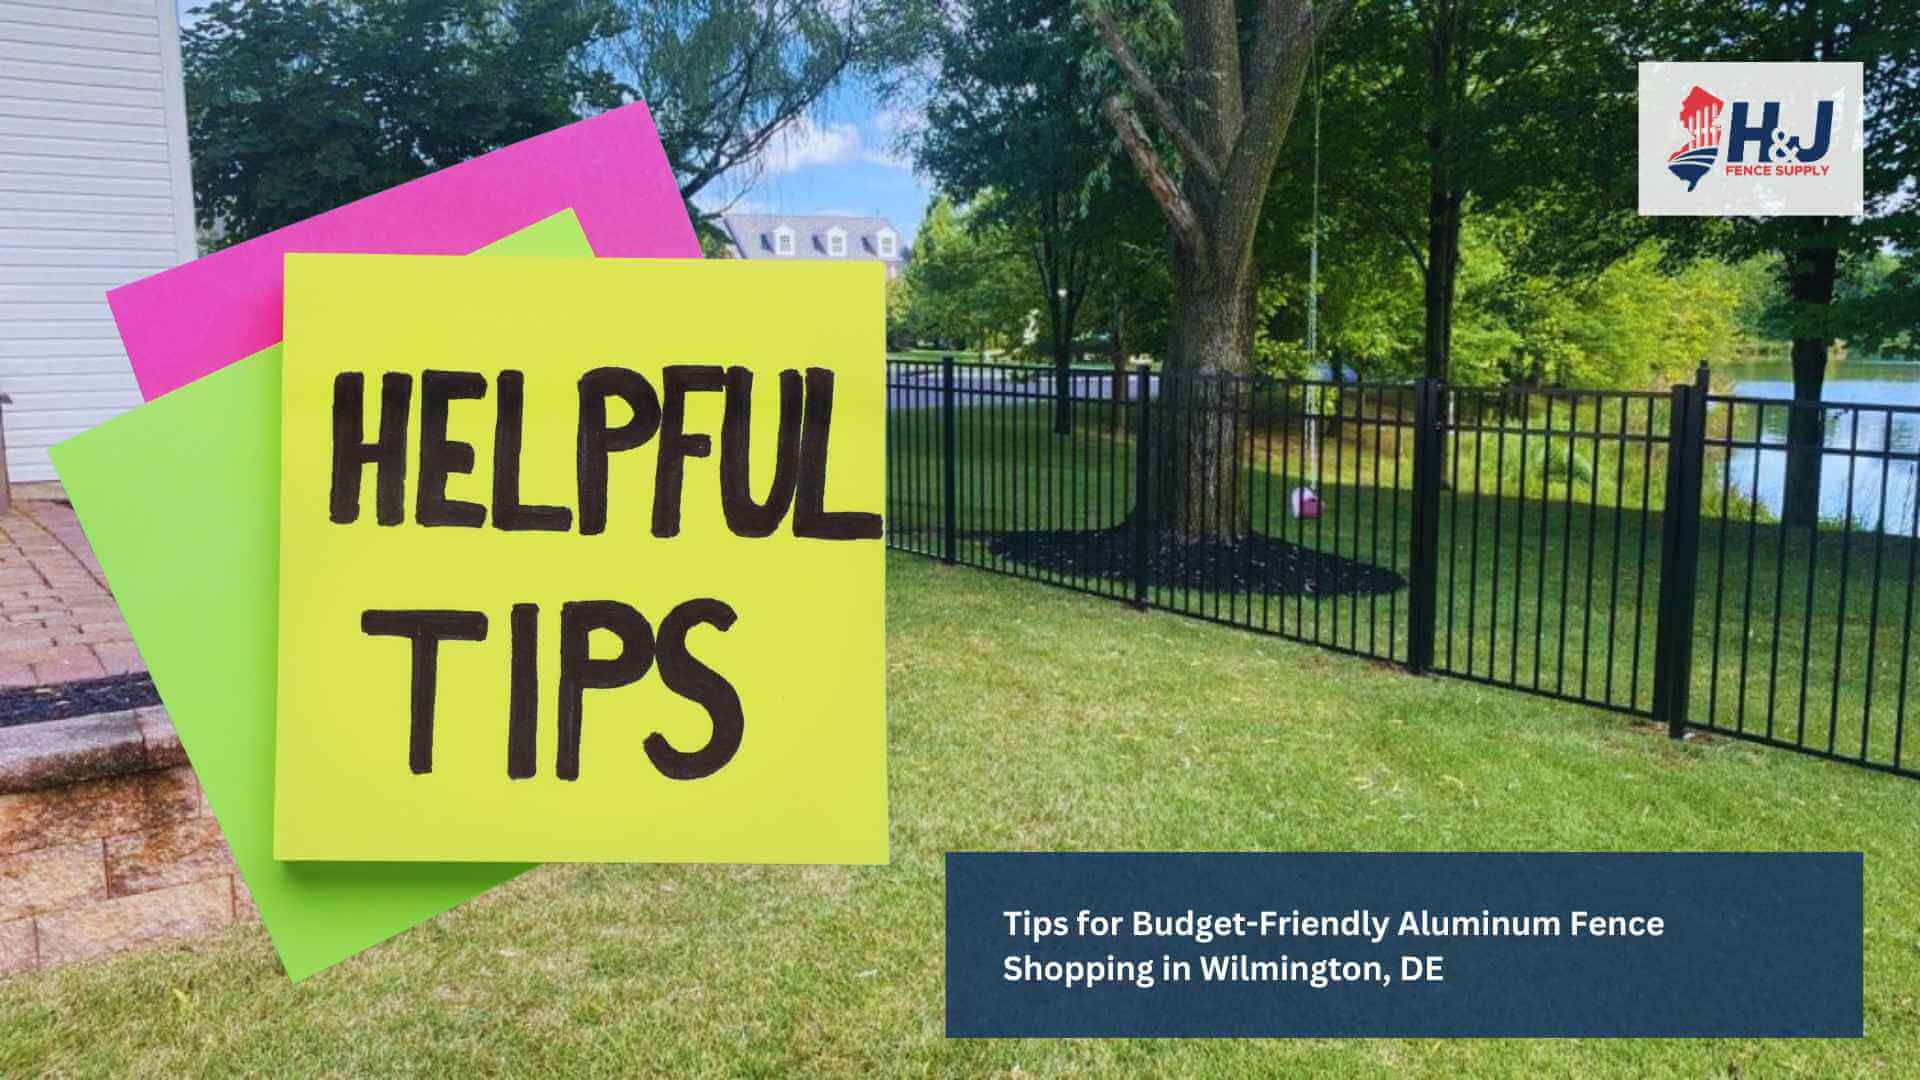 Tips for Budget-Friendly Aluminum Fence Shopping in Wilmington, DE